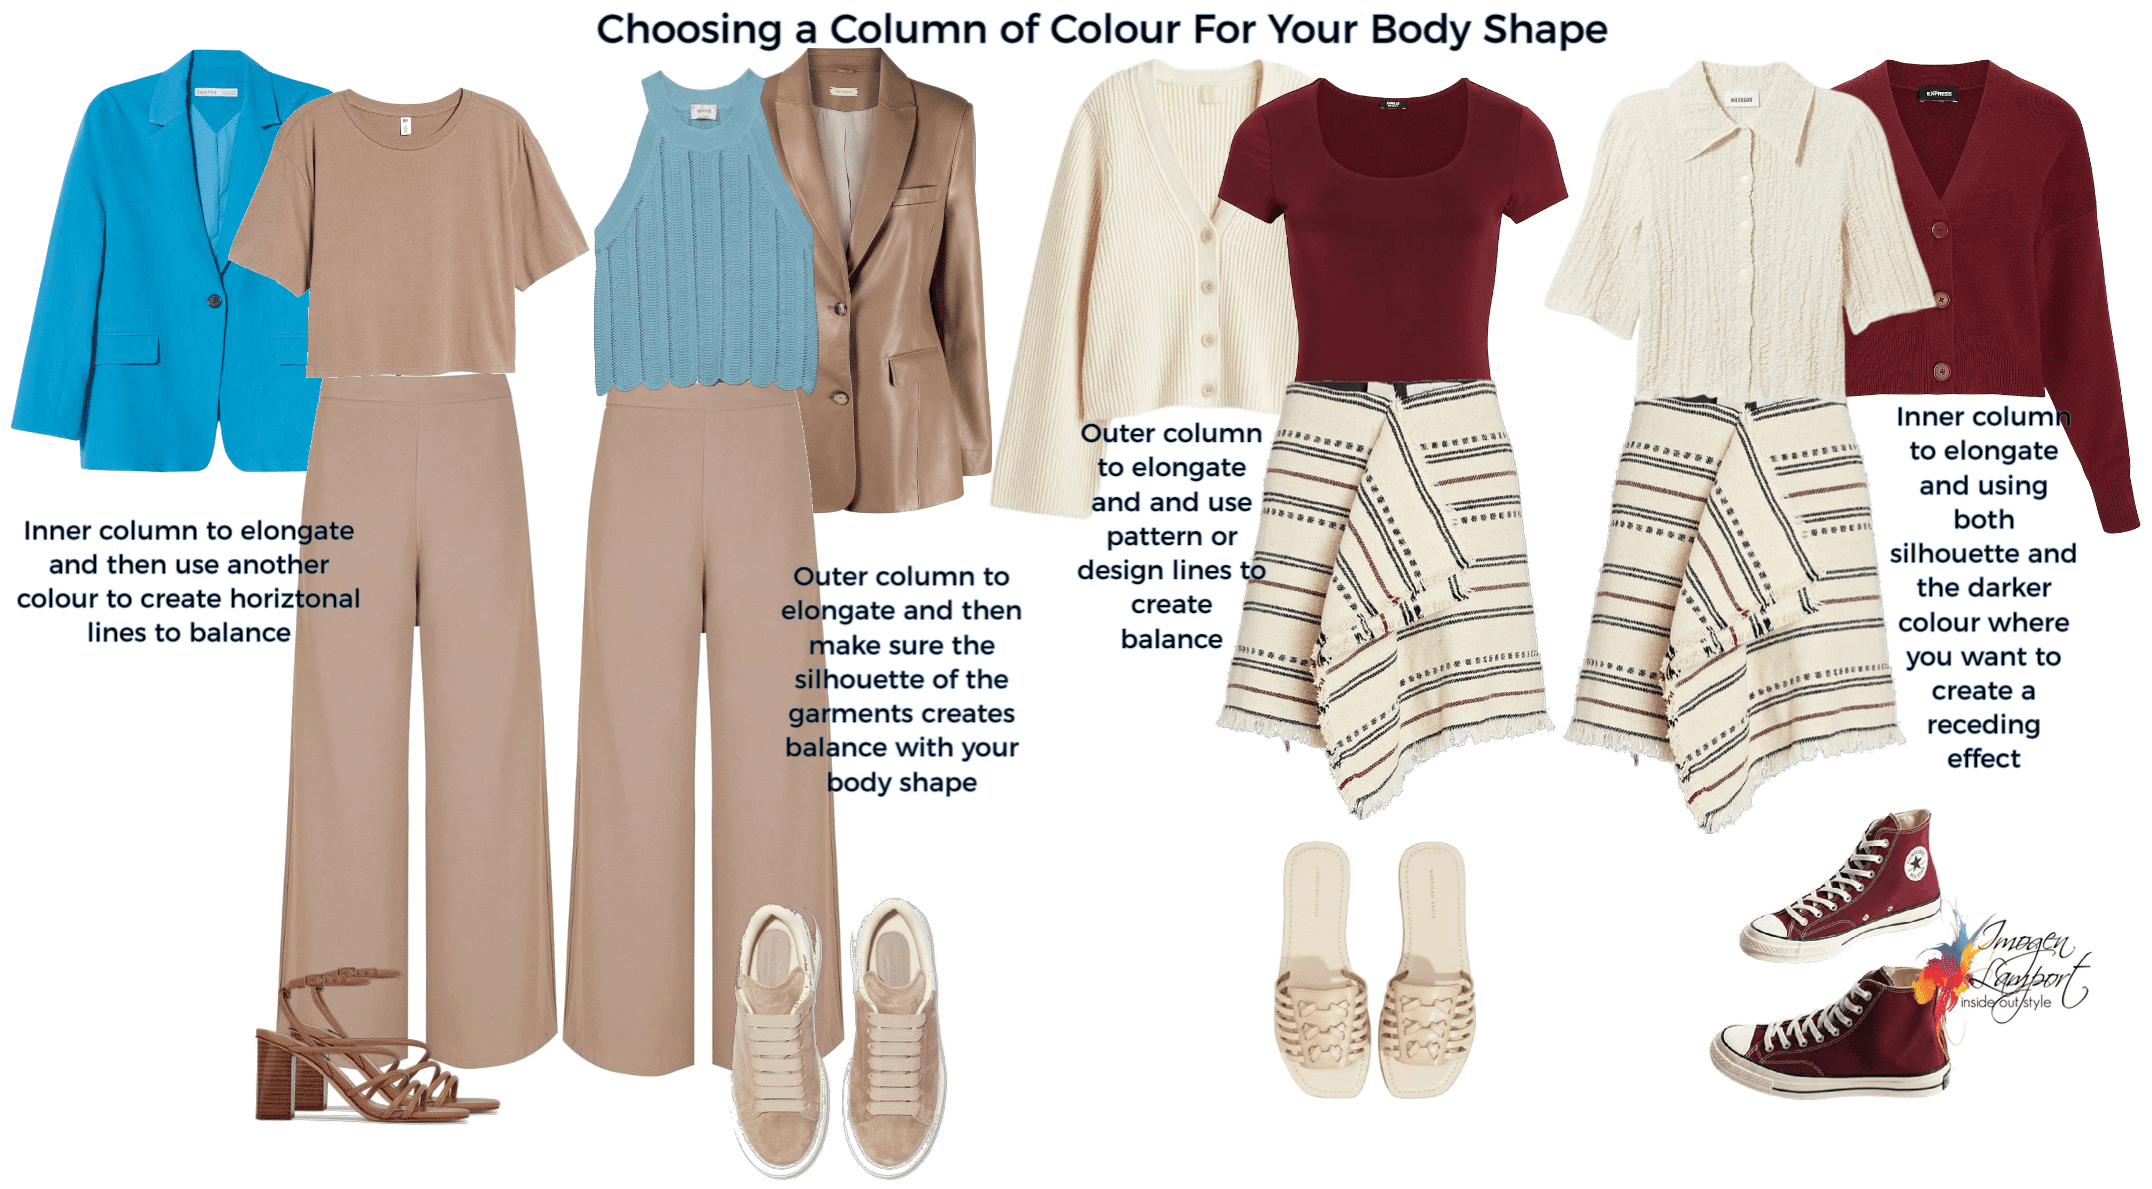 Choosing a column of colour to flatter your body shape